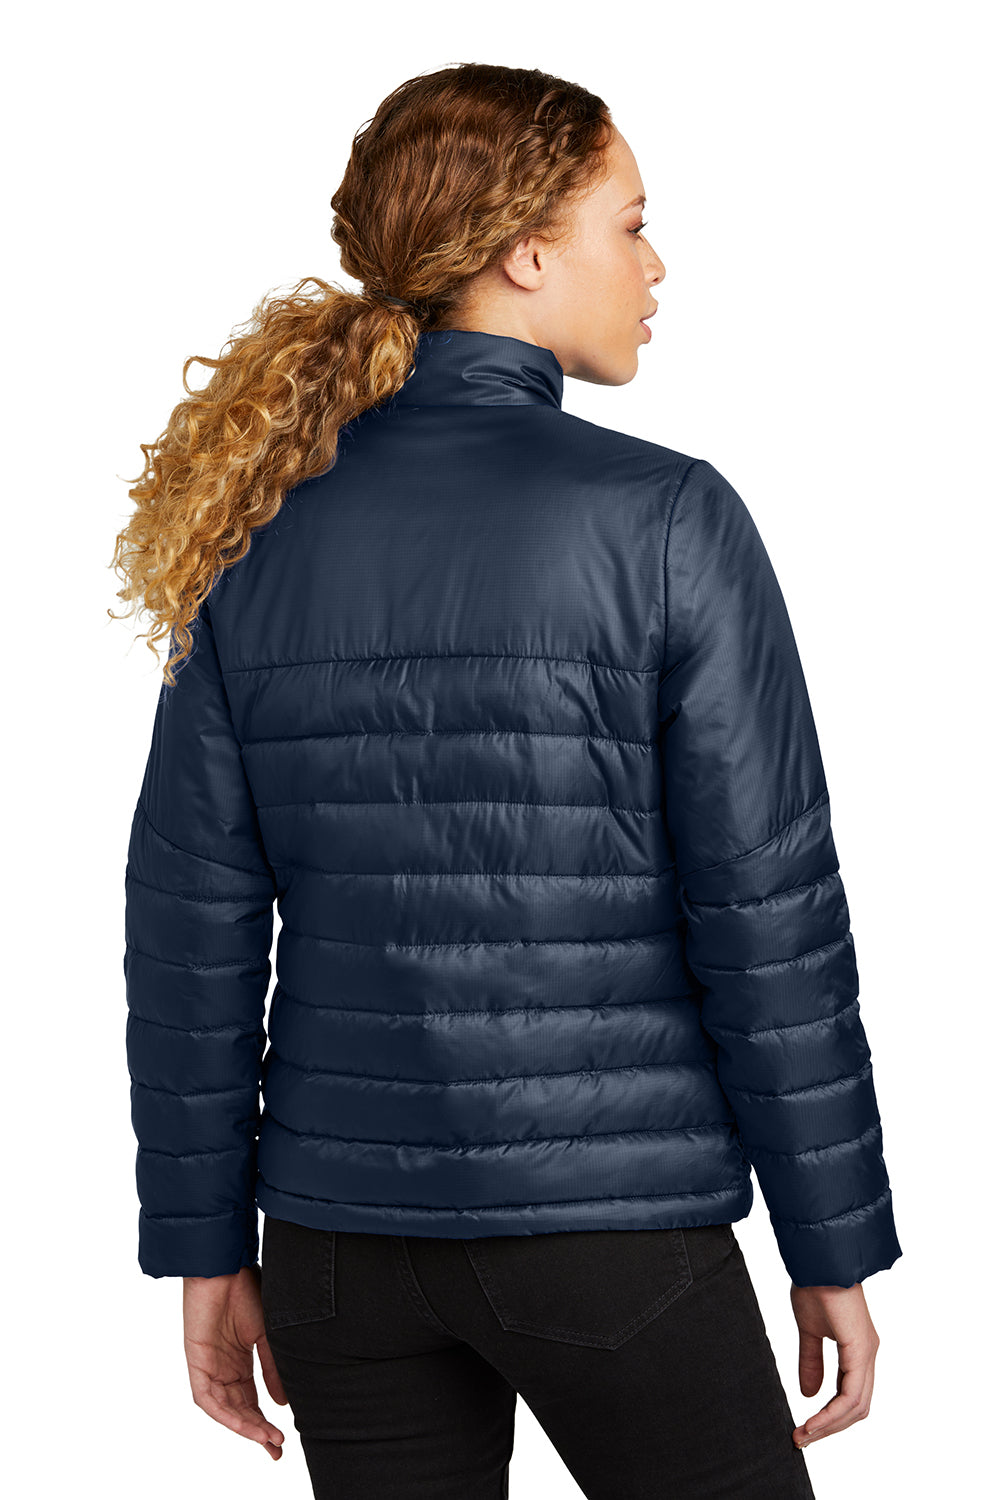 Eddie Bauer EB511 Womens Water Resistant Quilted Full Zip Jacket River Navy Blue Model Back